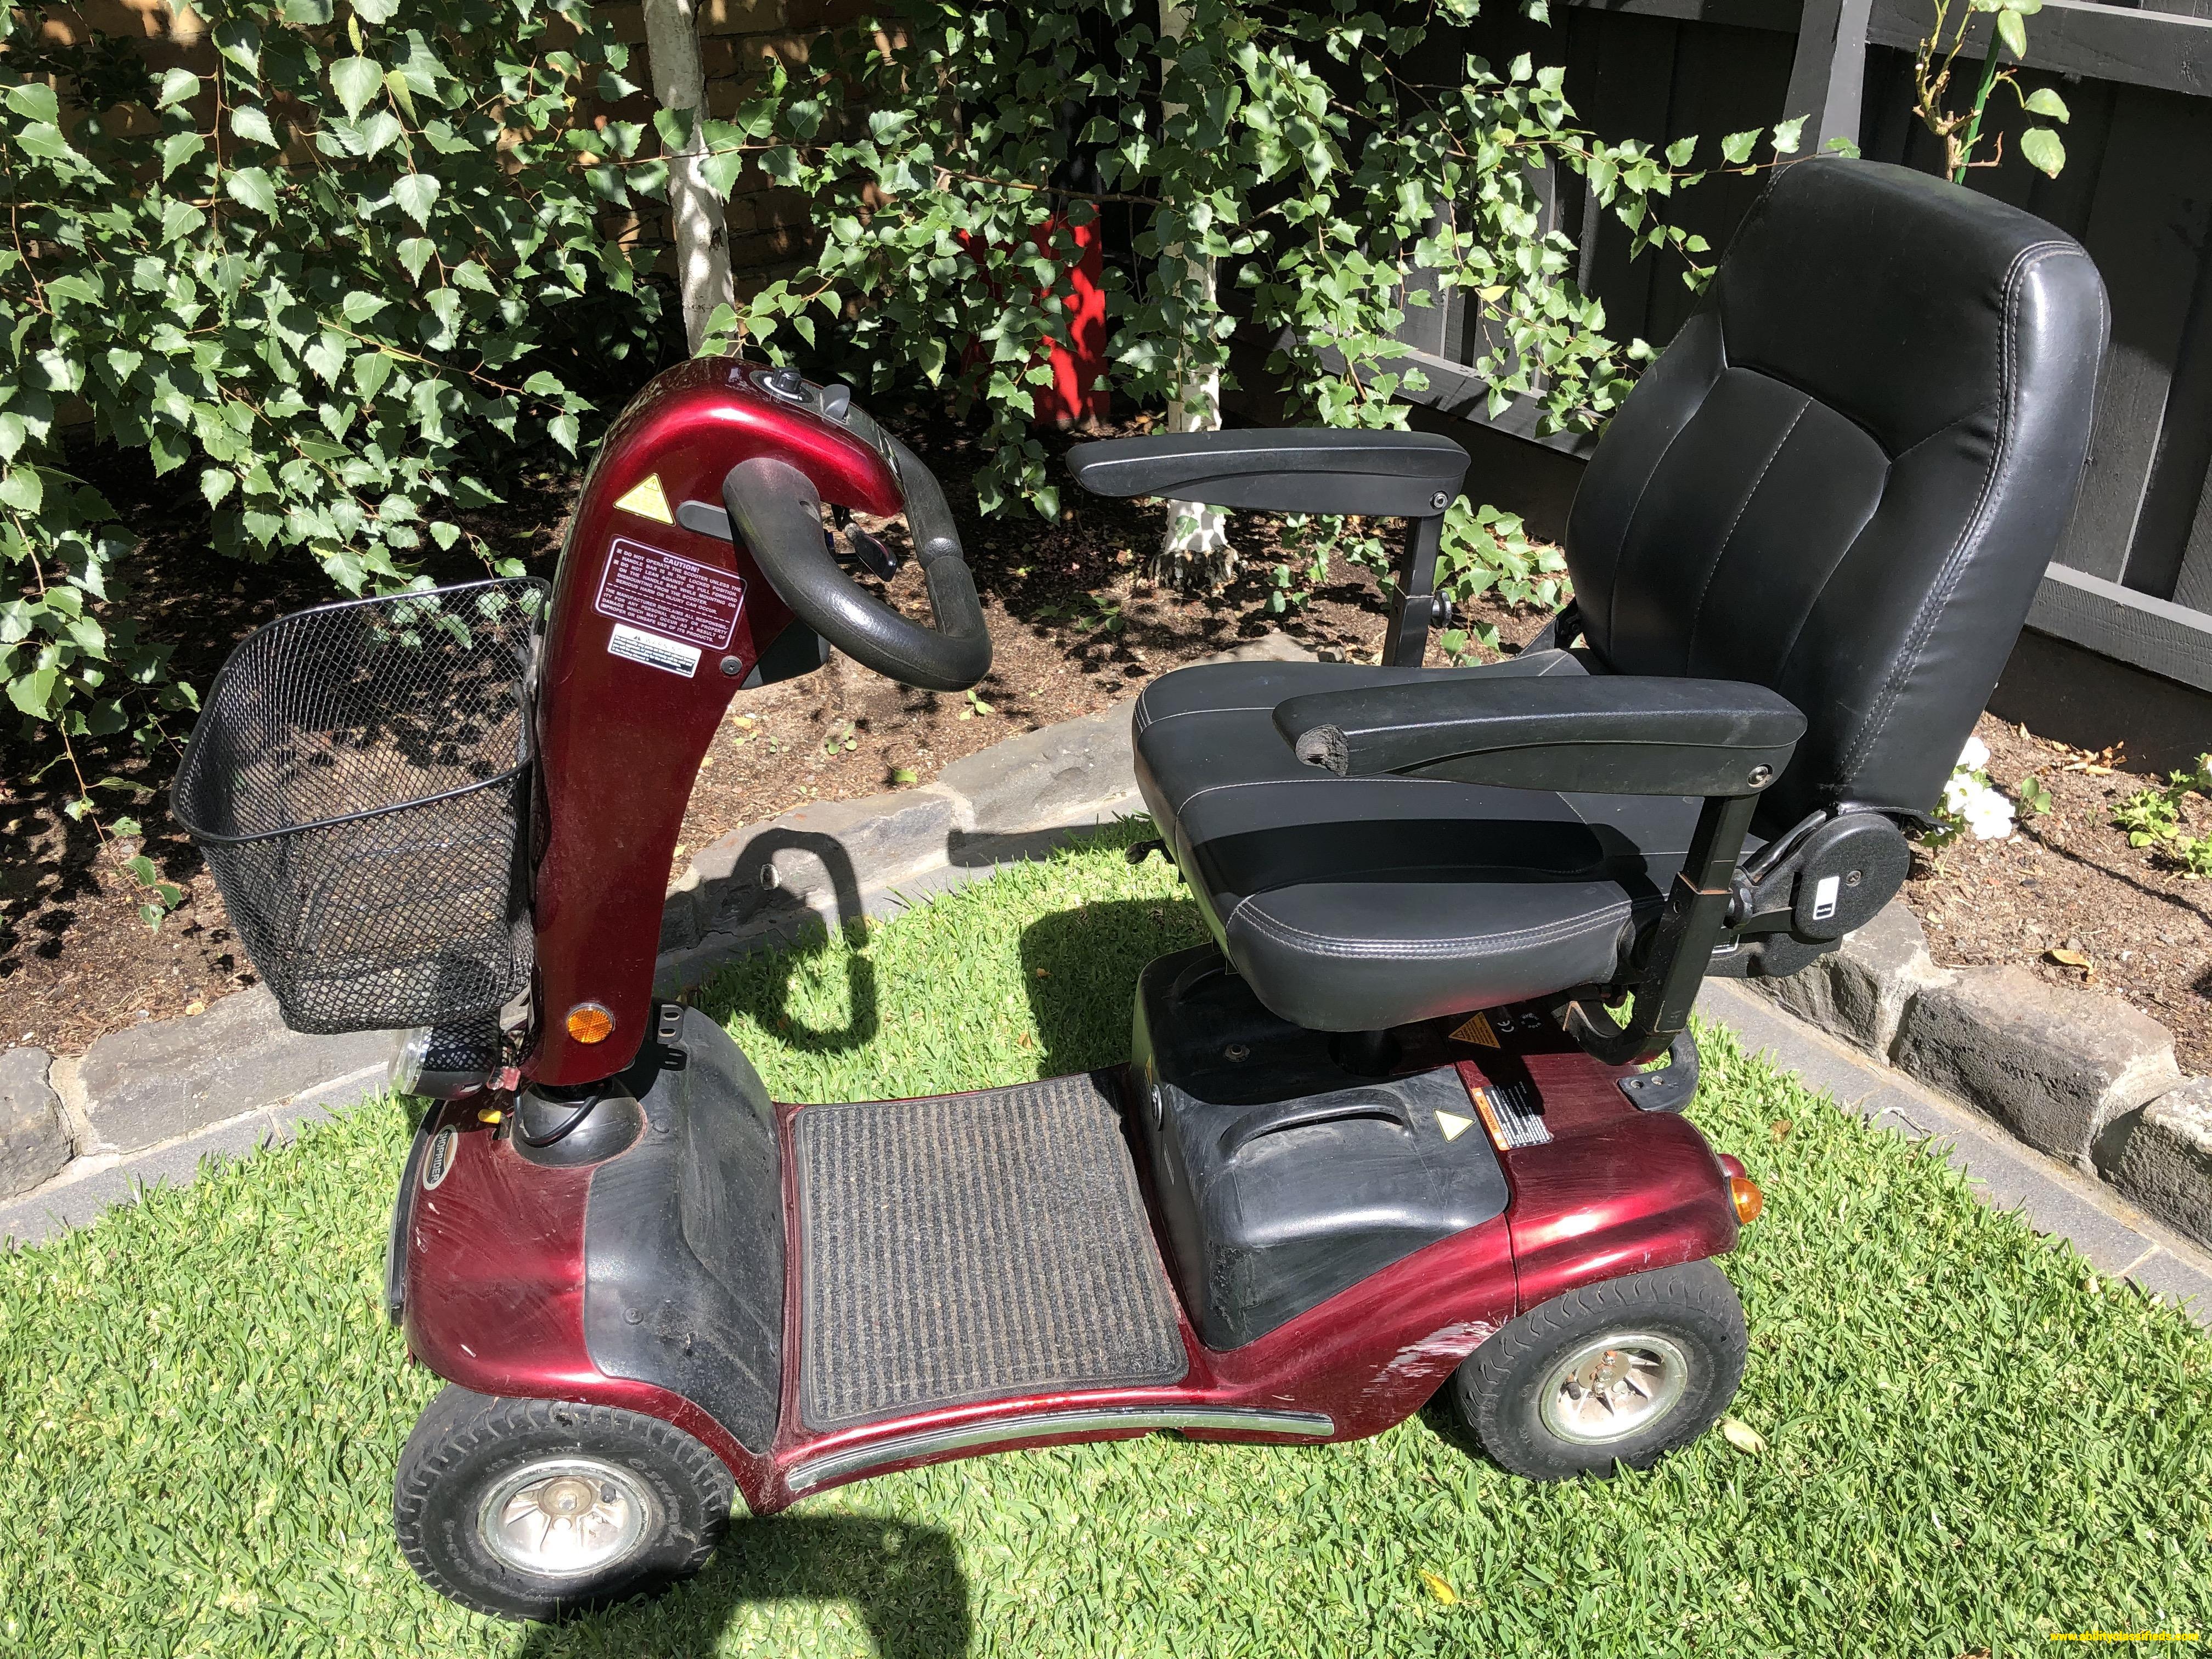 Mobility Scooter - Shoprider, 5 years old